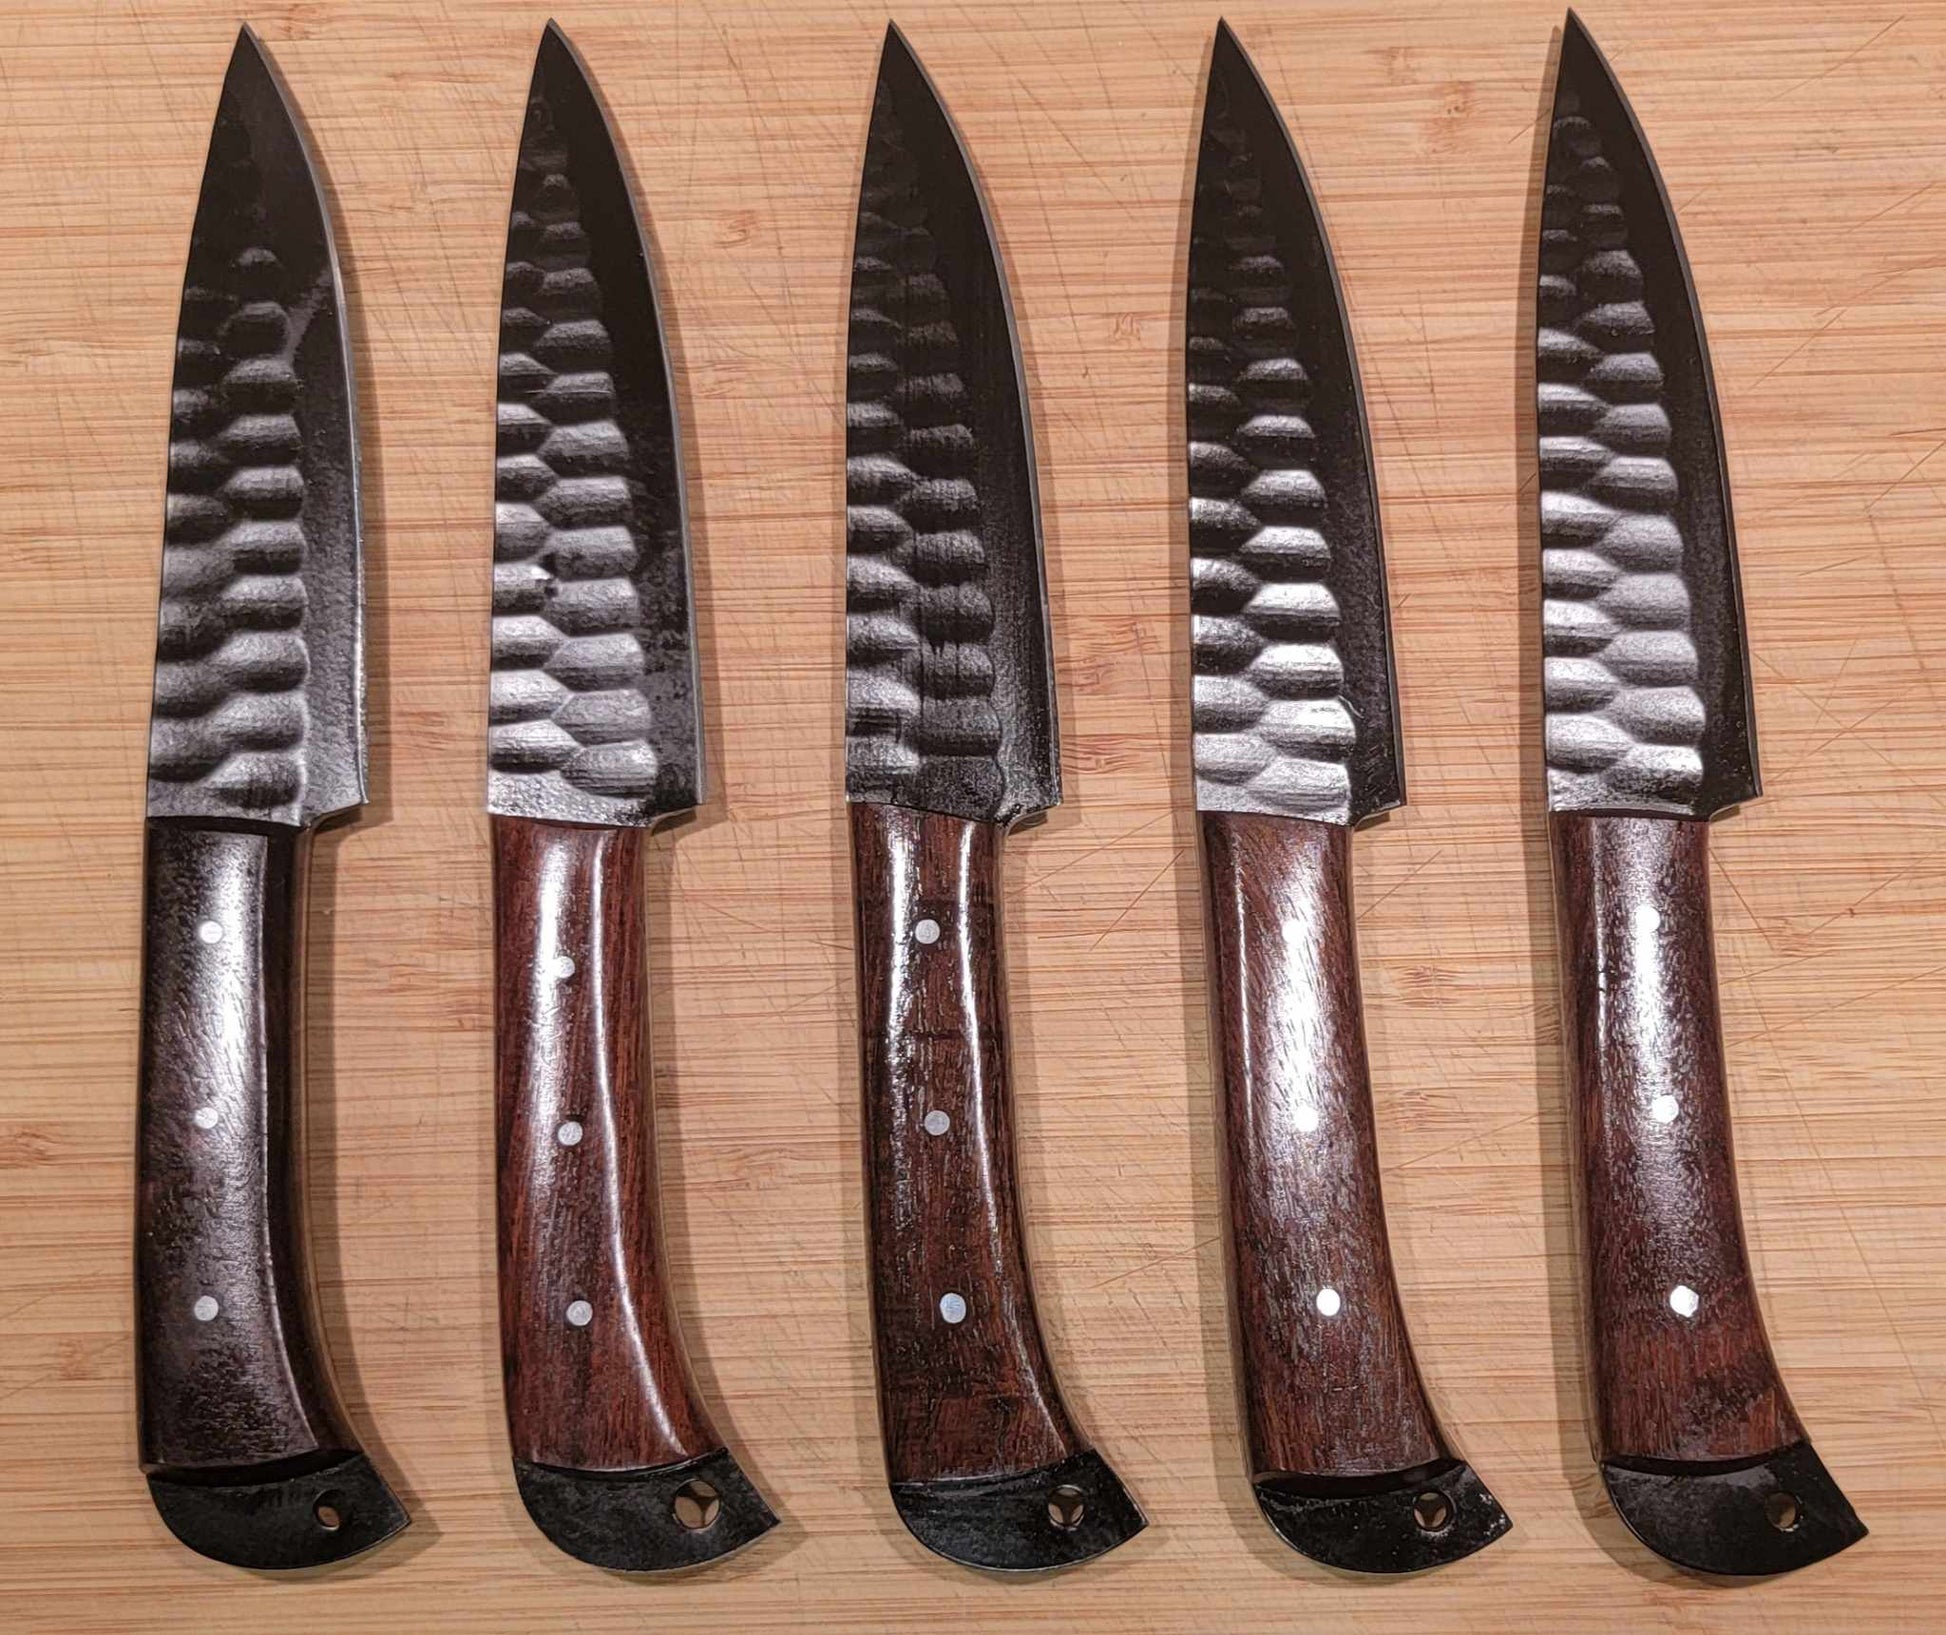 Hand forged steak knives